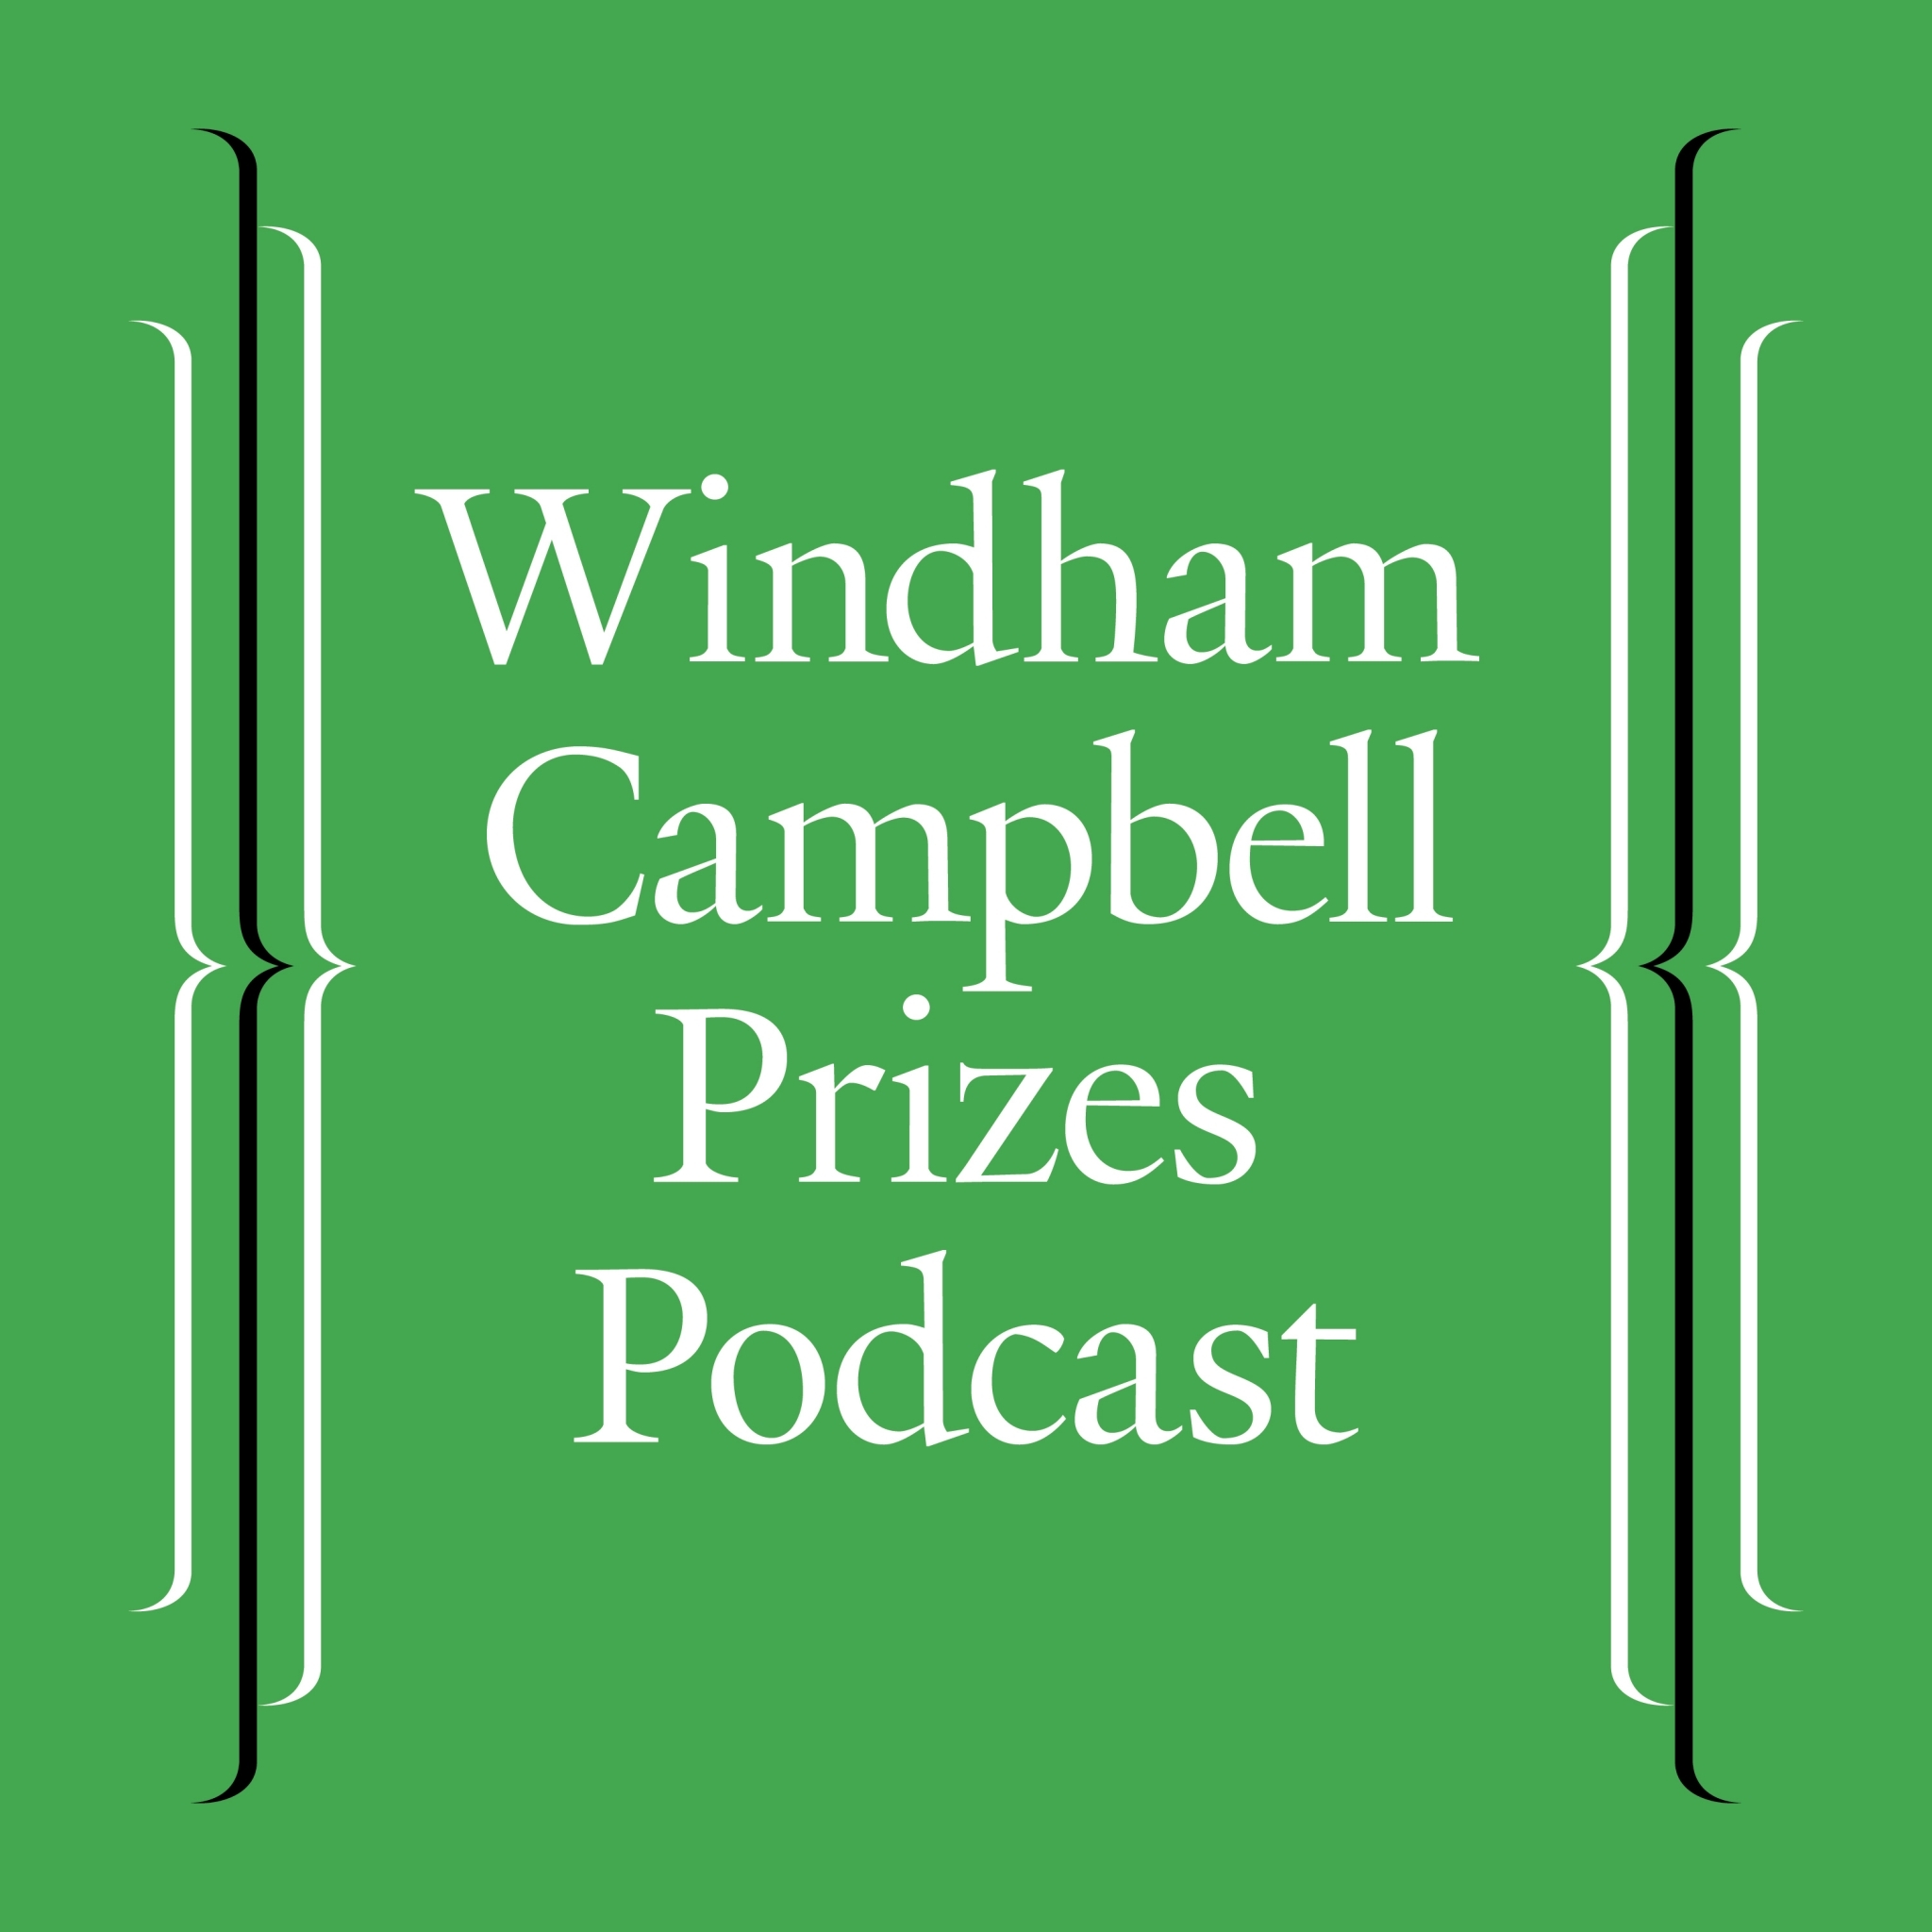 Introducing the Windham-Campbell Prizes Podcast